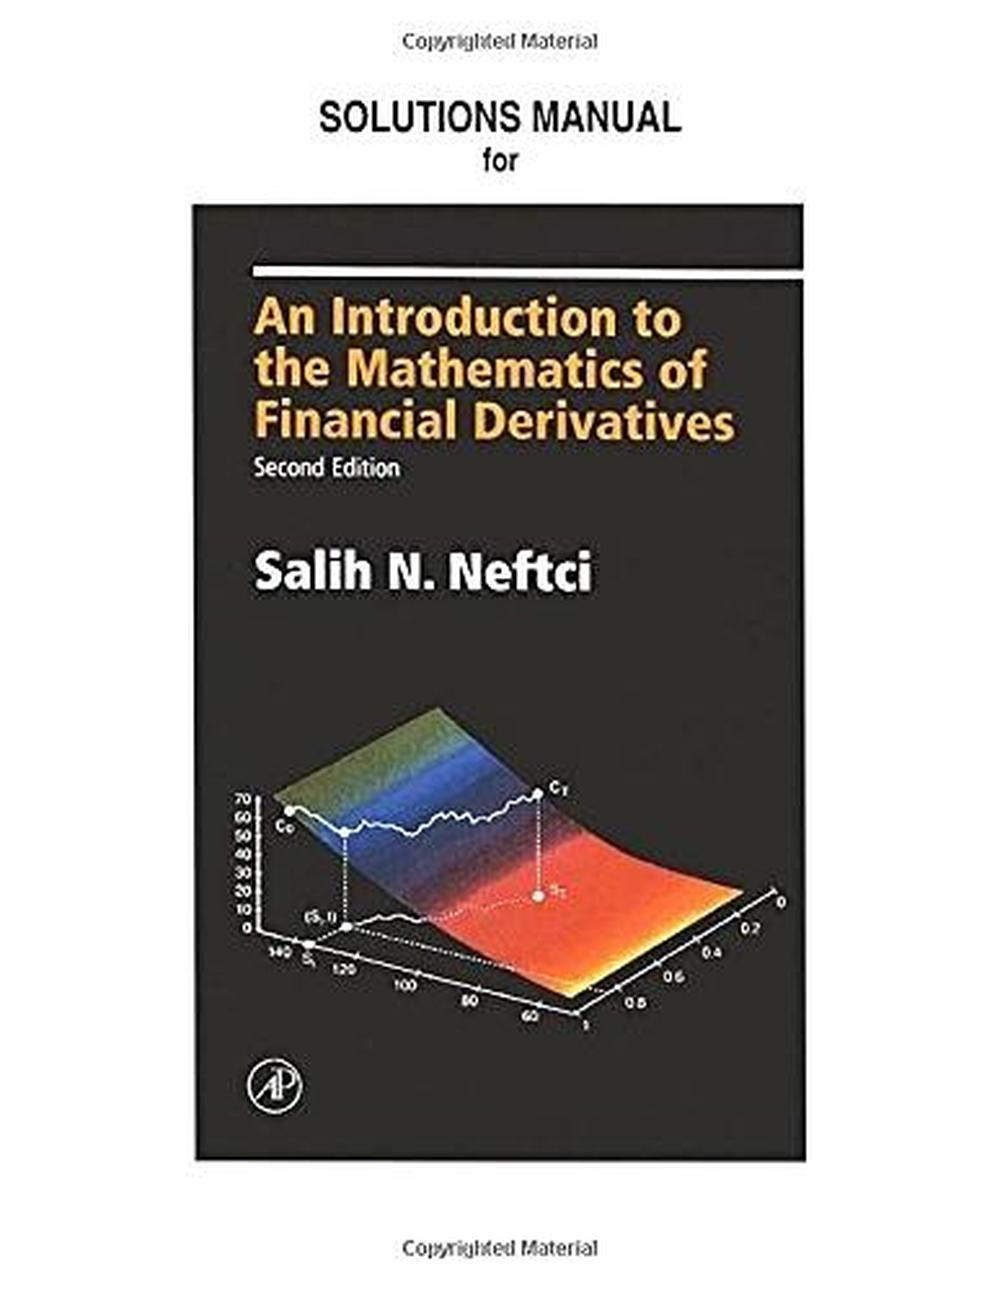 Solution Manual for An Introduction to the Mathematics of Financial Derivatives, 9780125153935